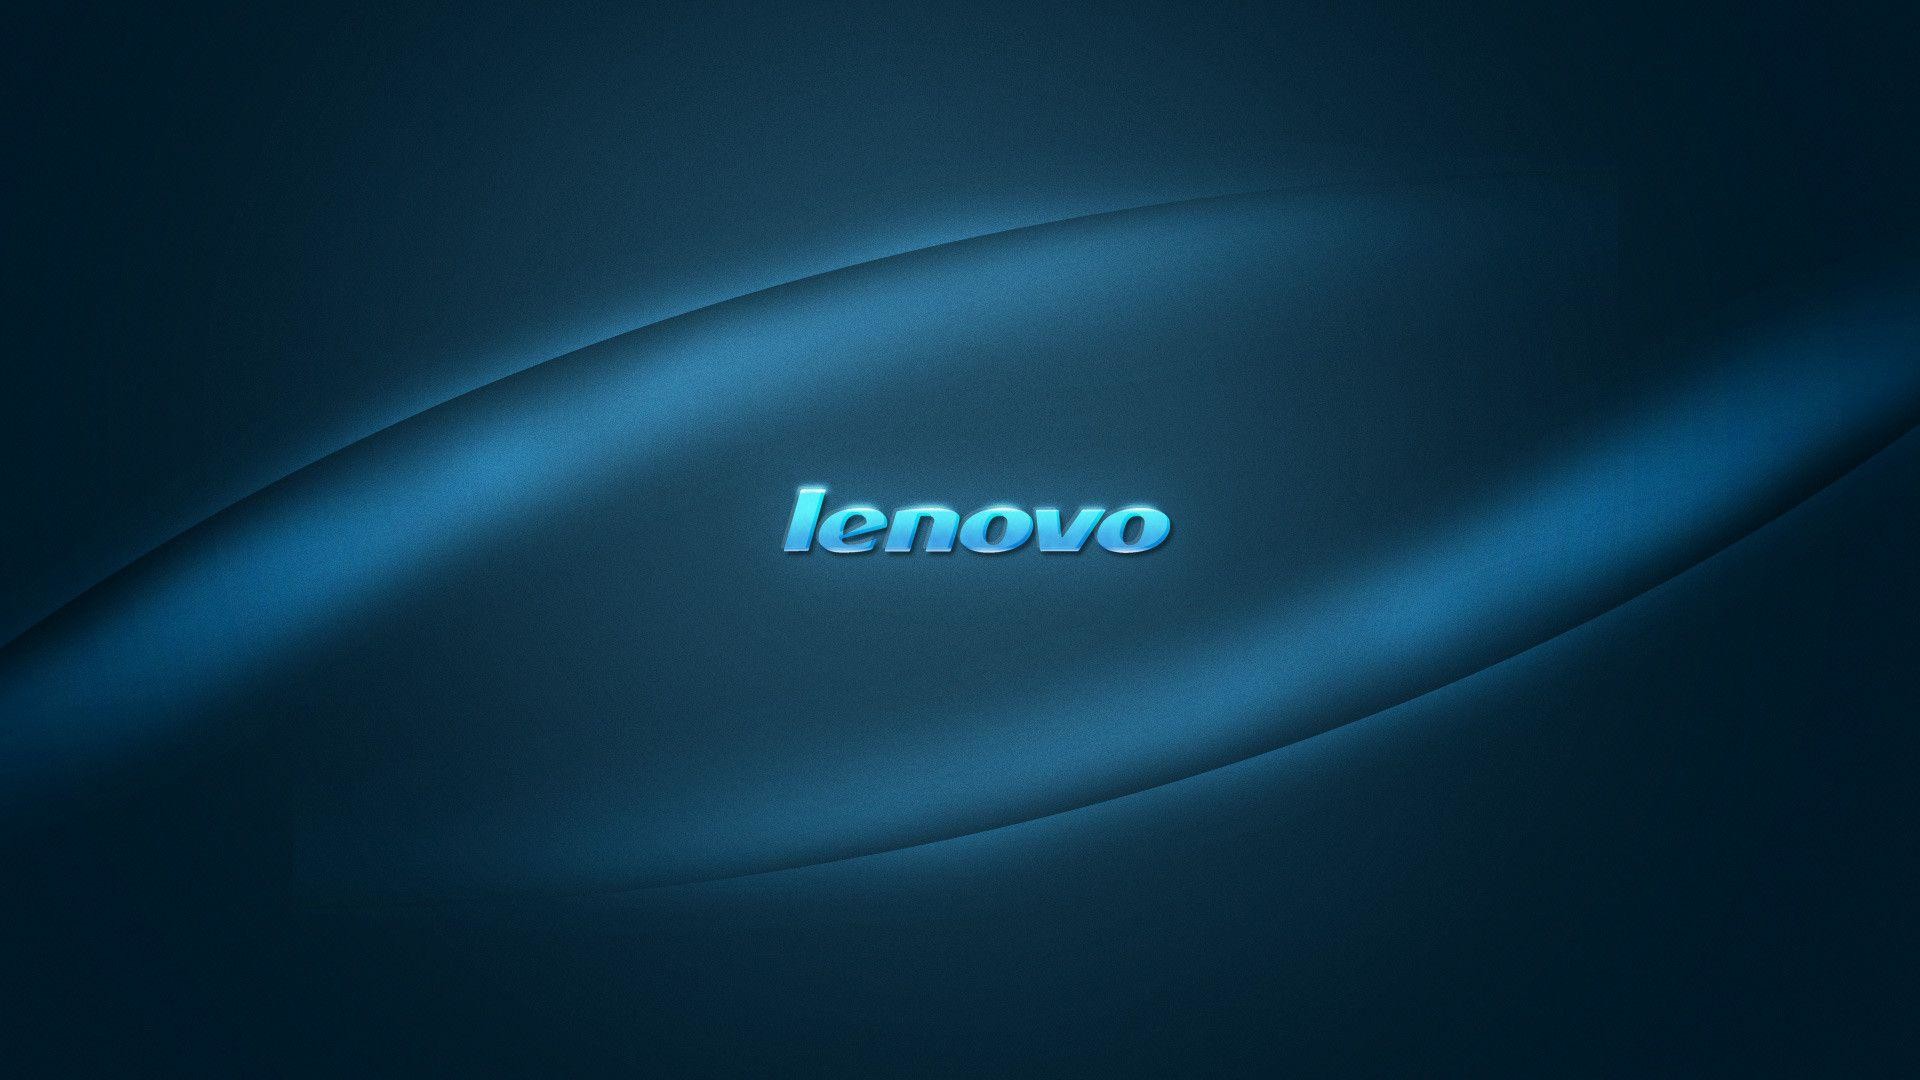 1920x1080 Lenovo Wallpaper Collection in HD for Download